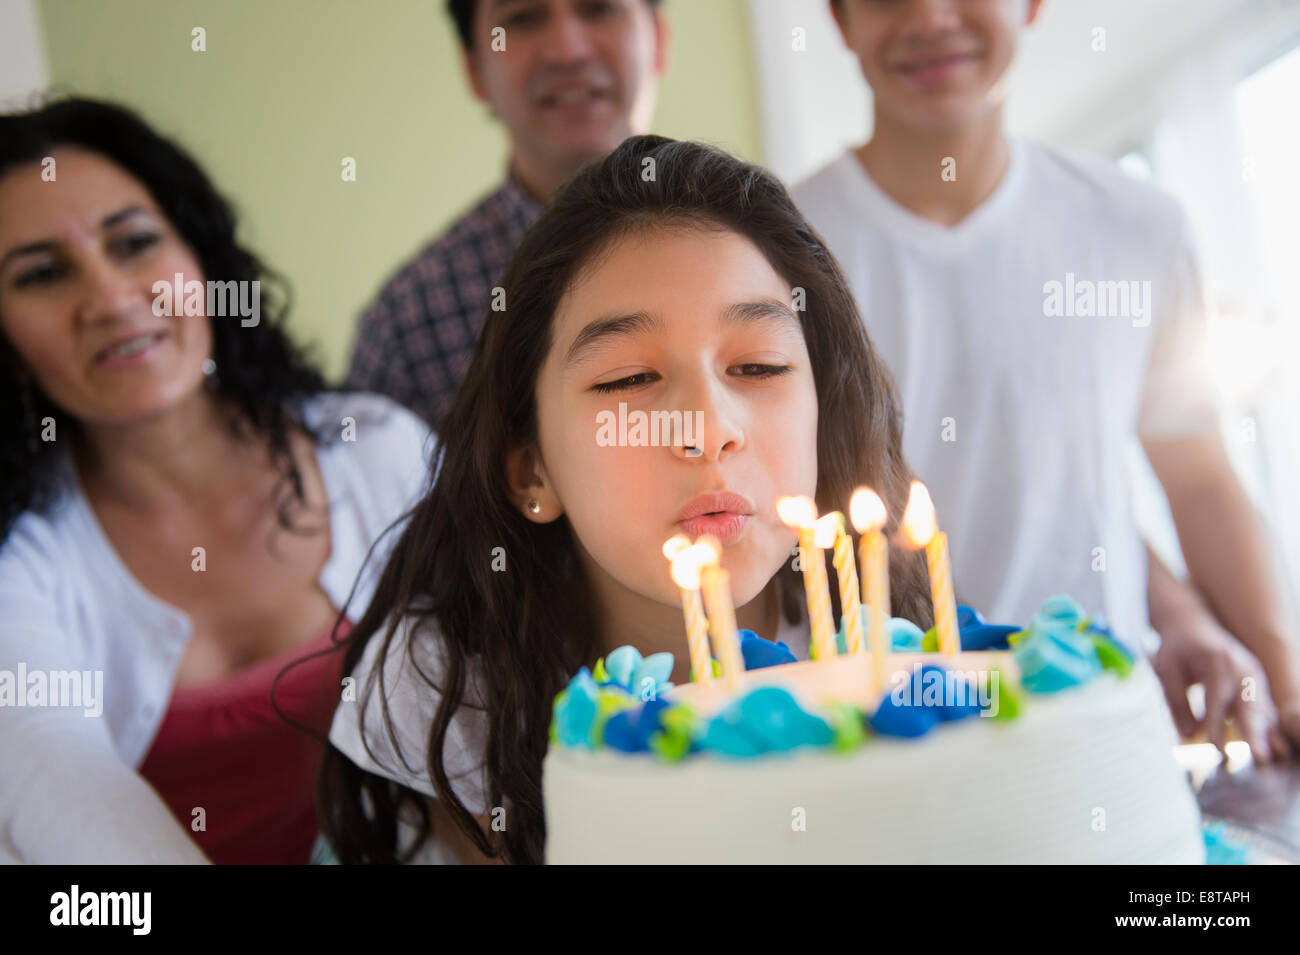 Hispanic girl blowing out candles on birthday cake Stock Photo